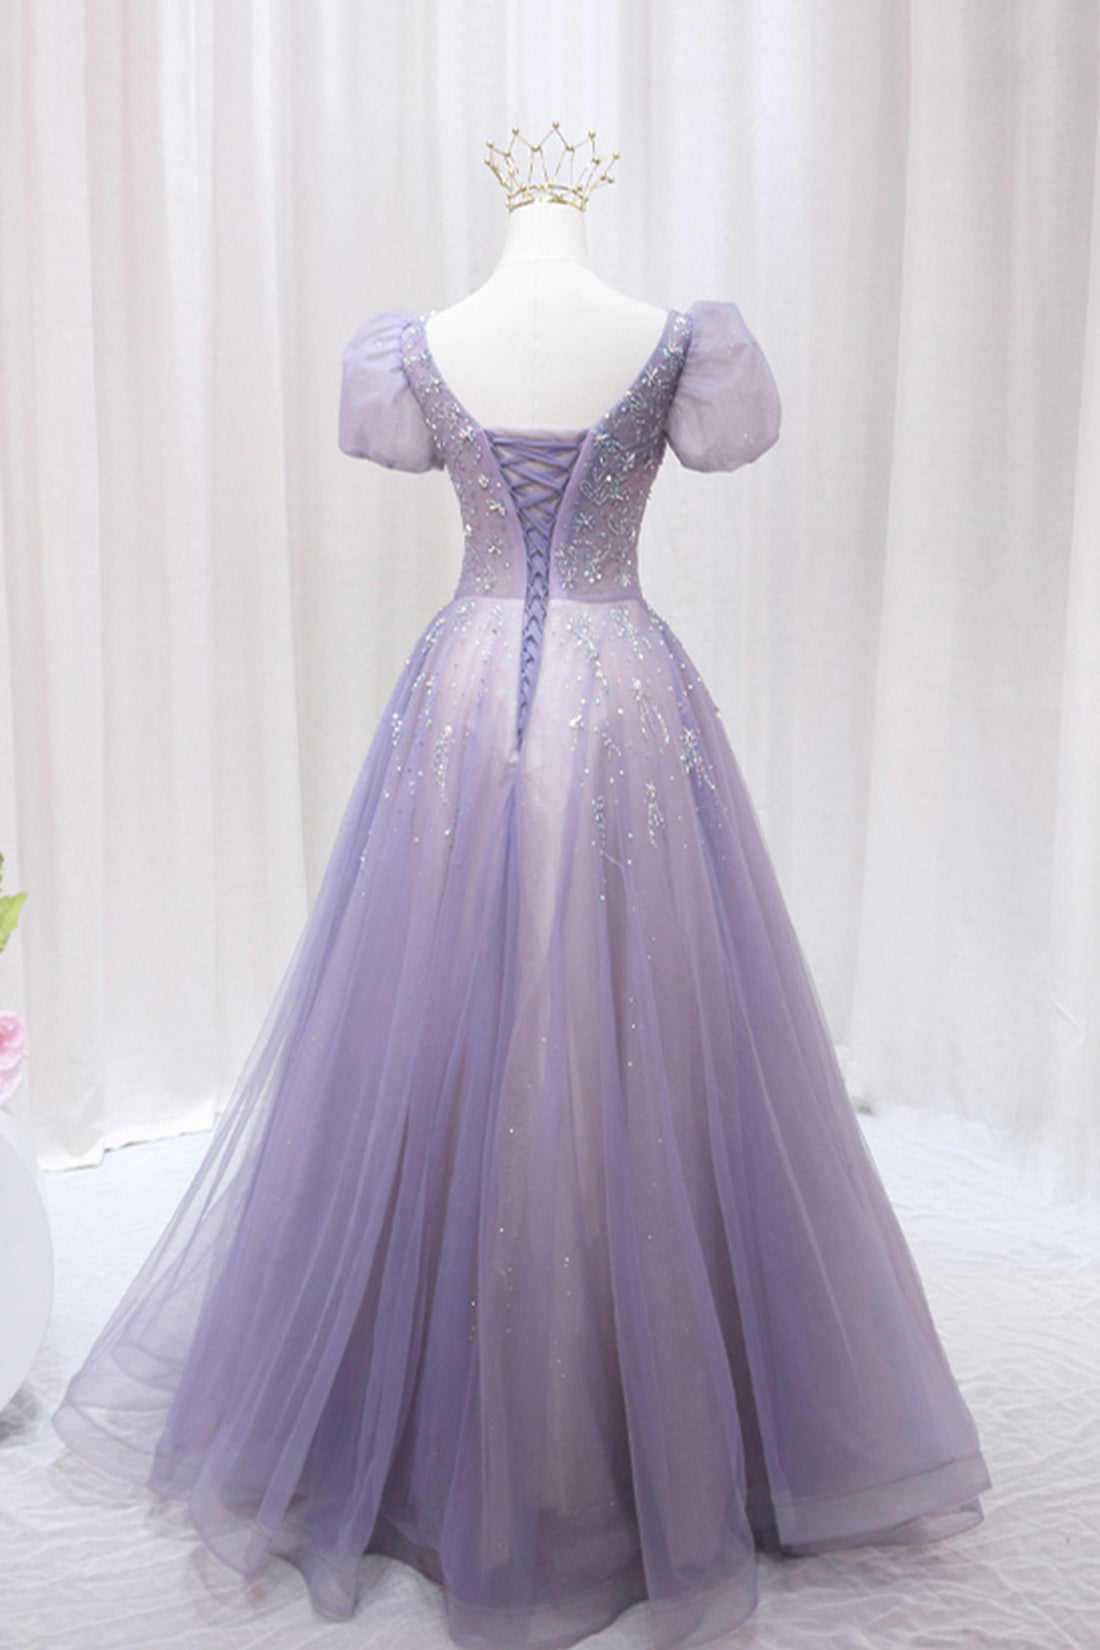 SQOSA A-Line Purple Tulle Beaded Long Prom Dress Formal Evening Gowns QP2272 US6 / As Picture